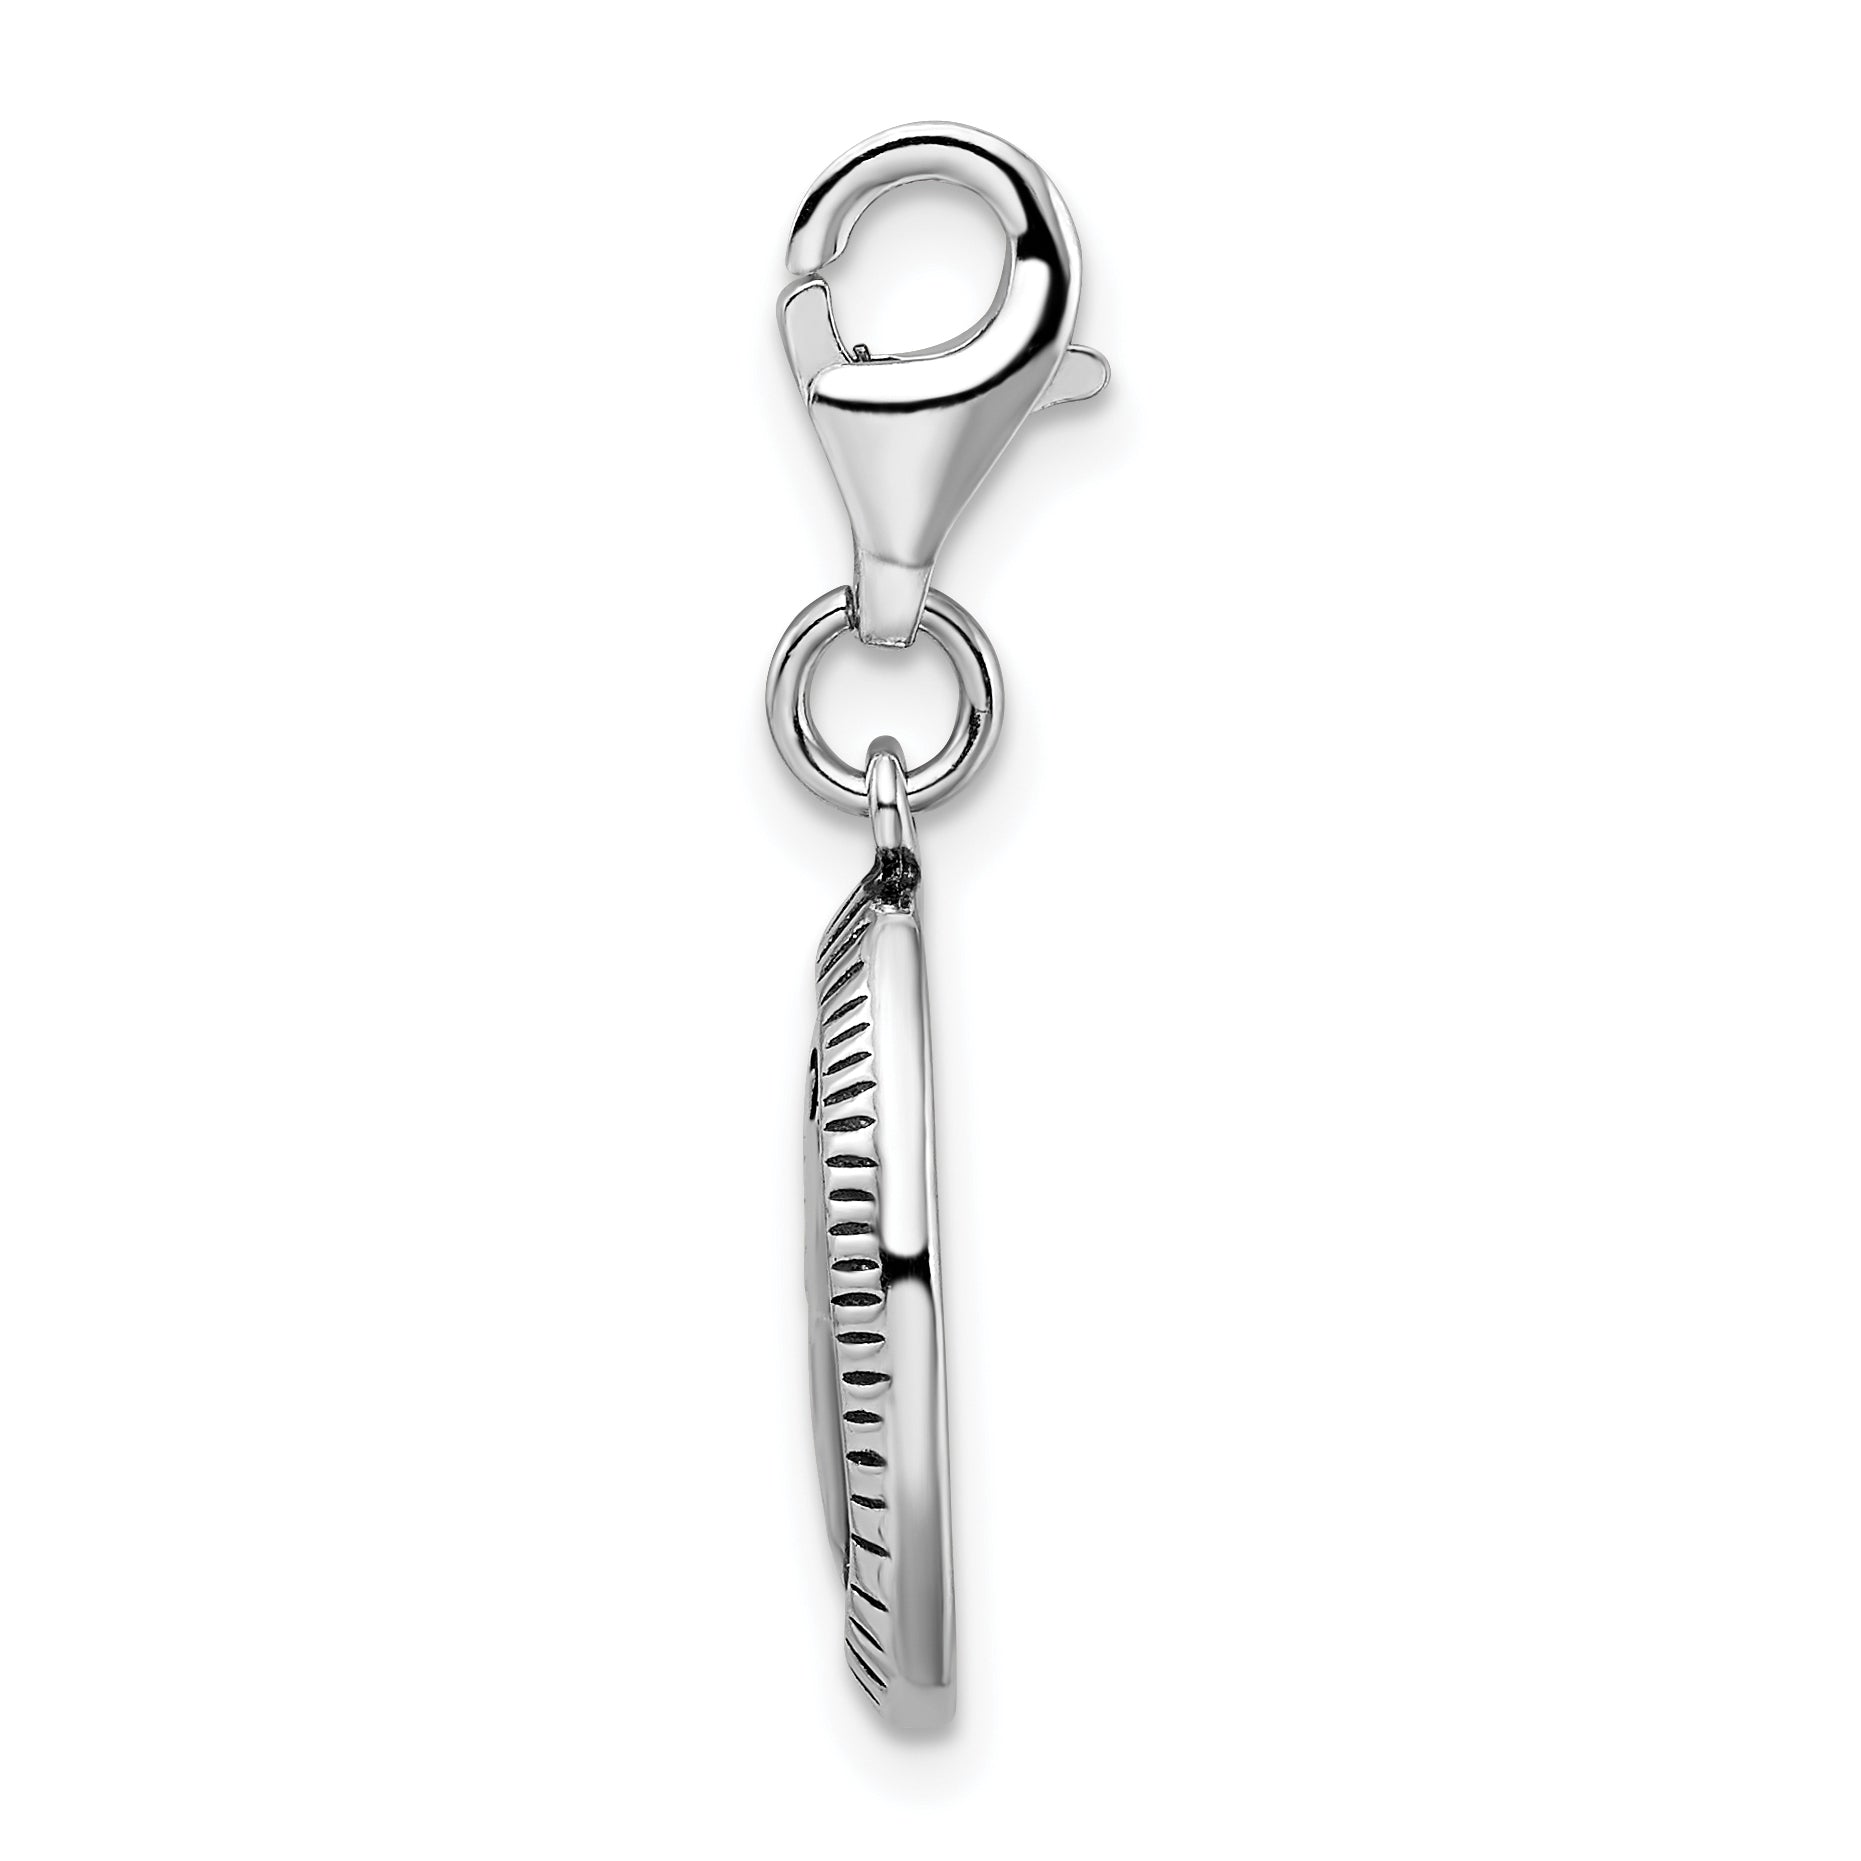 Amore La Vita Sterling Silver Rhodium-plated Polished Antiqued SURVIVOR Charm with Fancy Lobster Clasp